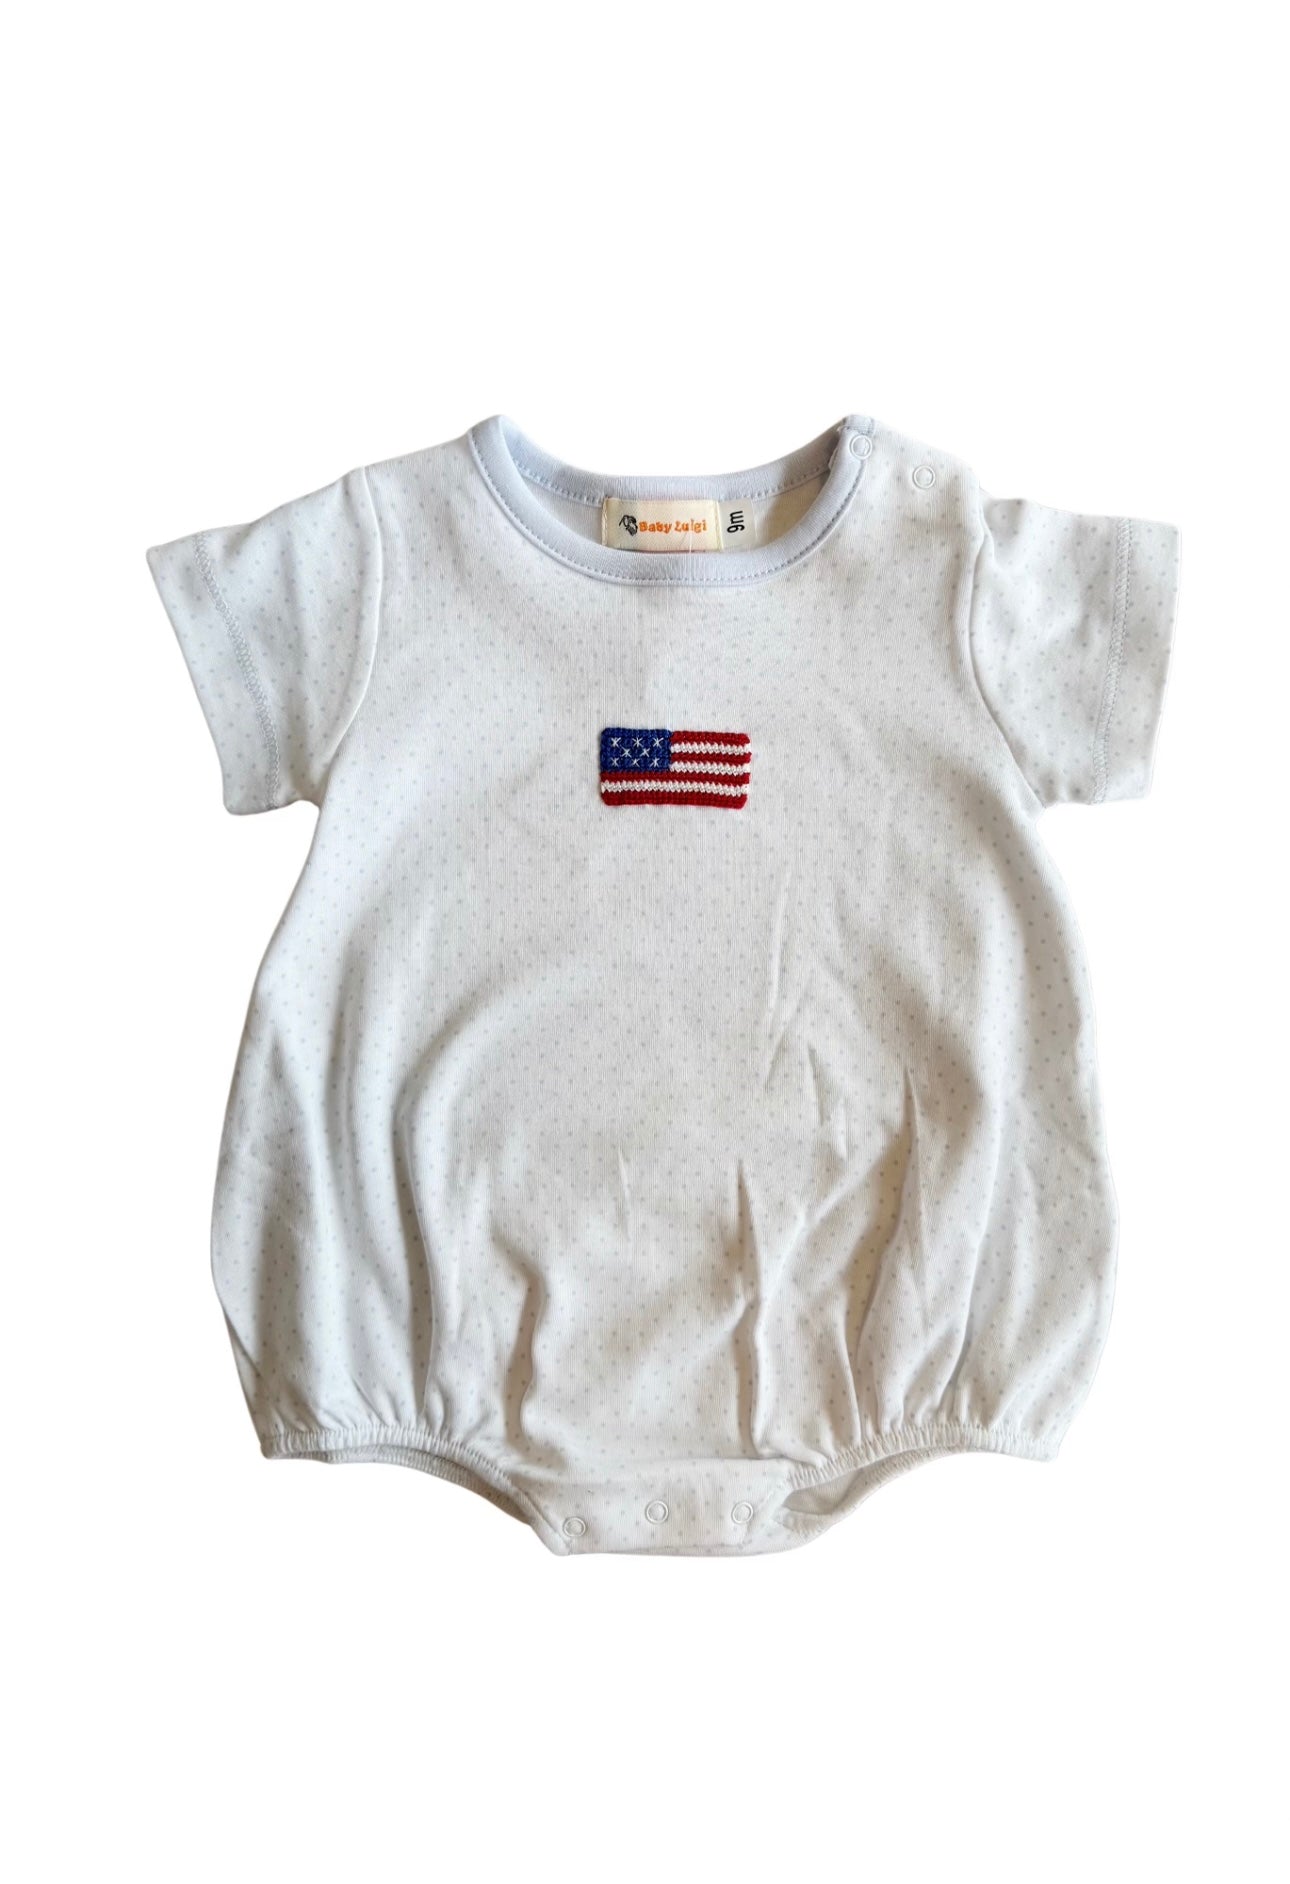 American Flag Bubble (Baby)